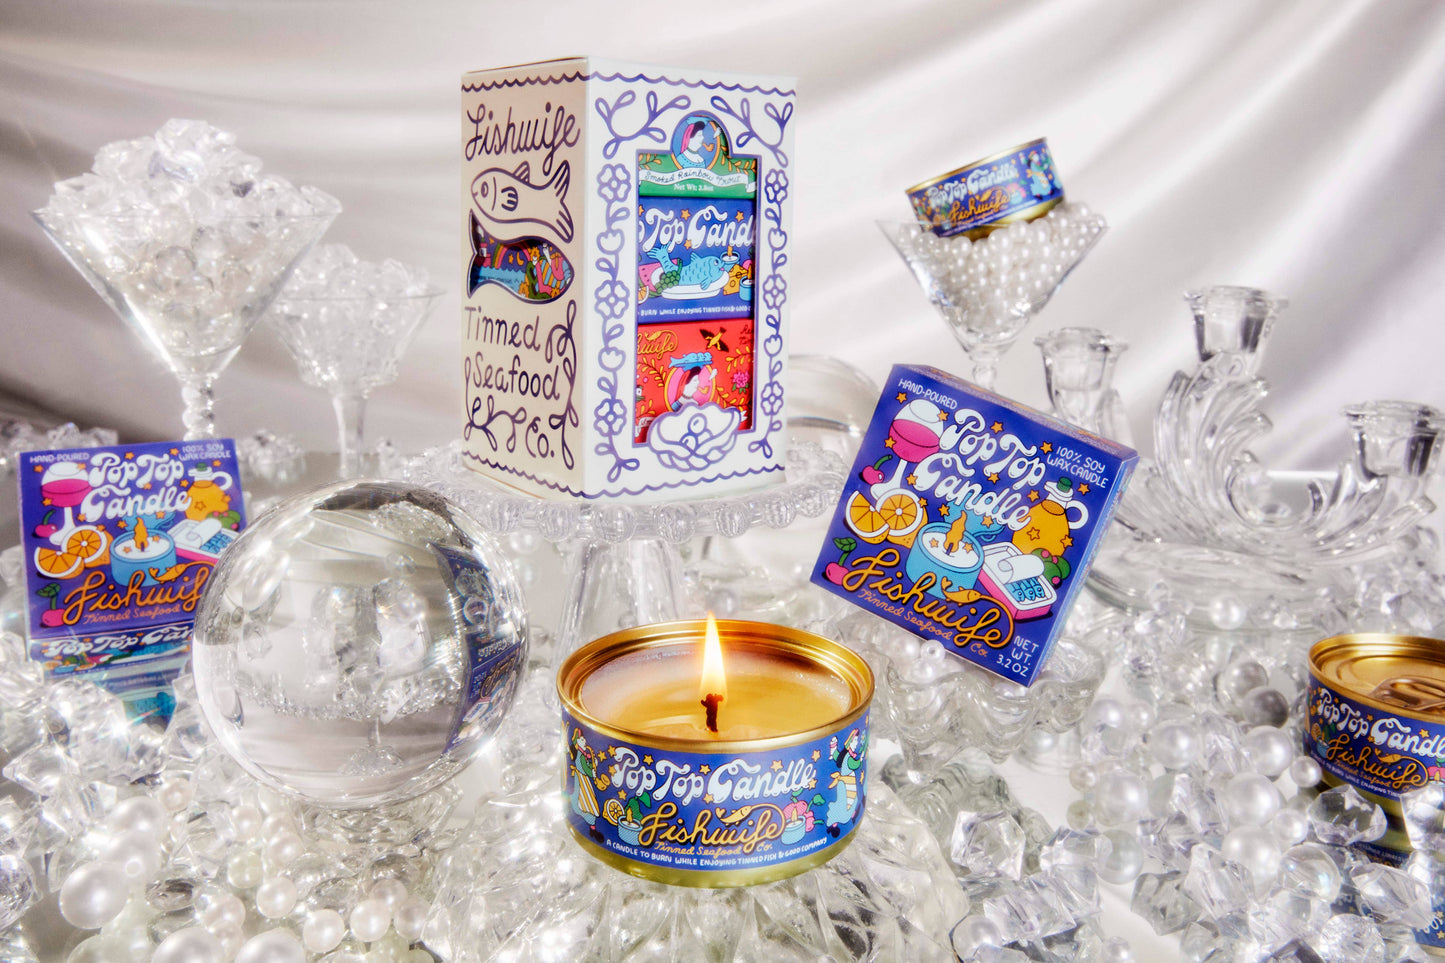 The Holiday Tinned Candle Trio